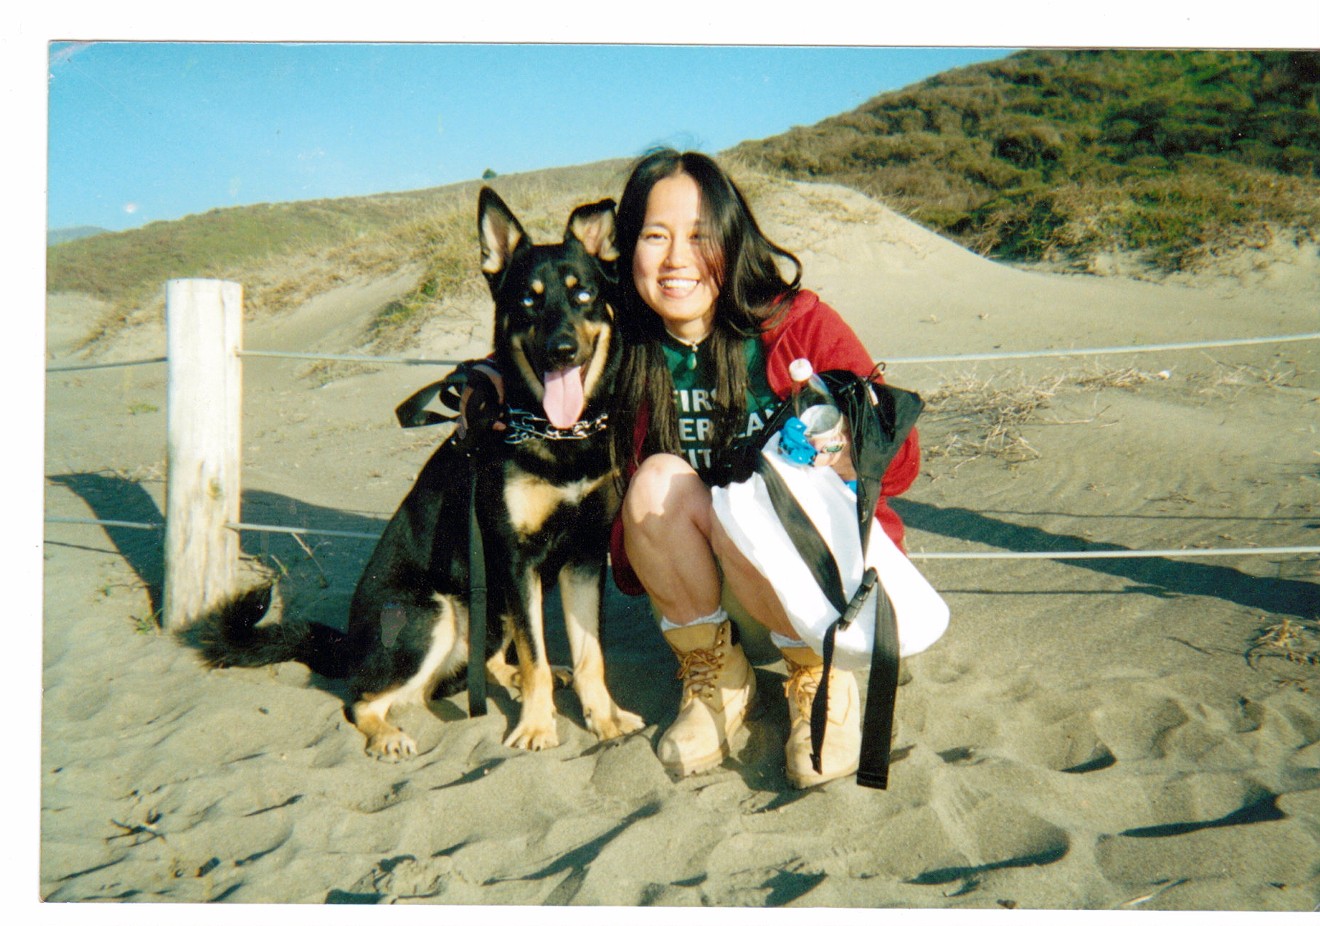 Tomomi Hanamure and her dog, Blues, visiting America. Hanamure's life and death is the subject of Pure Land by Annette McGivney